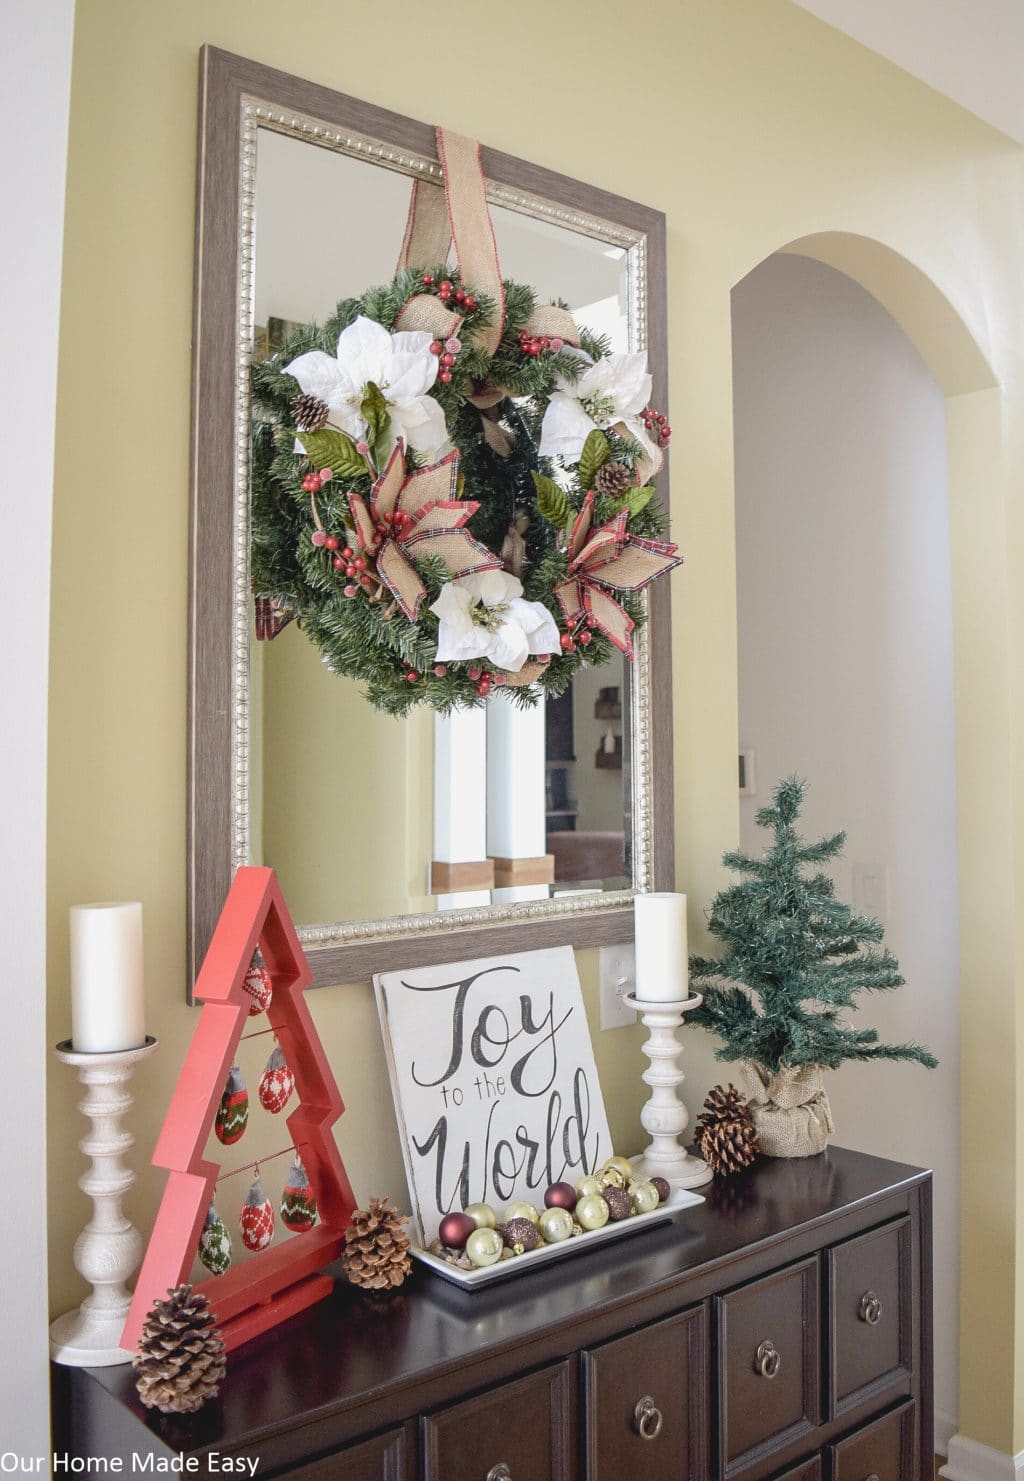 See the entire foyer decorated for Christmas!